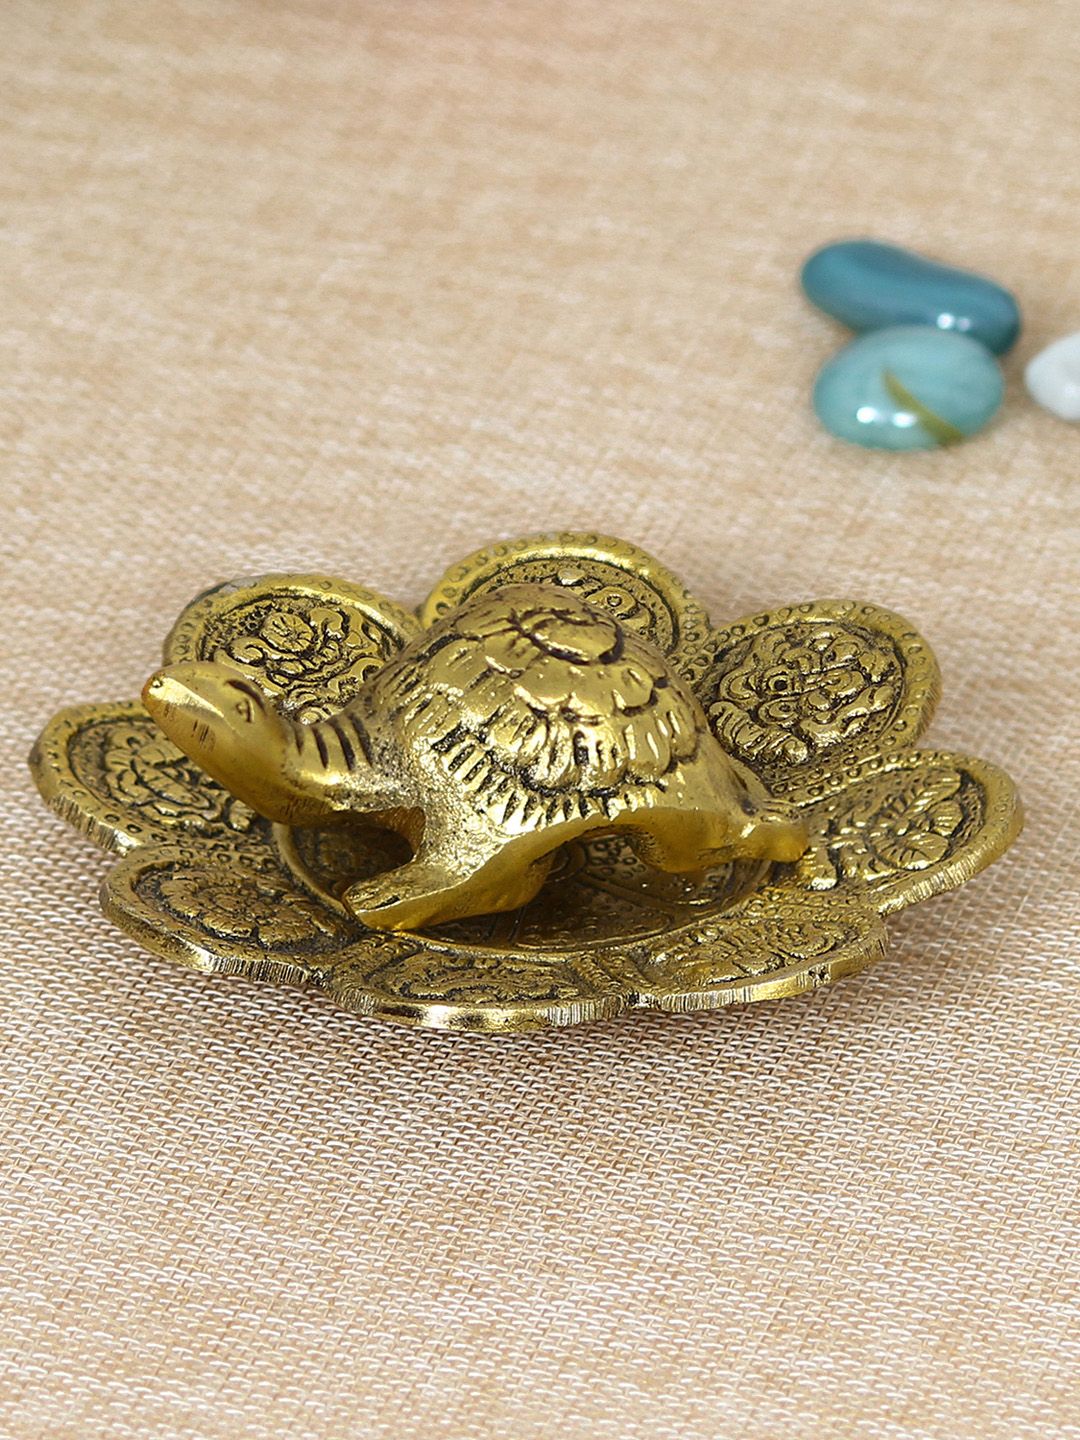 eCraftIndia Gold-Toned Handcrafted Feng Shui Tortoise With Decorative Plate Showpiece Price in India